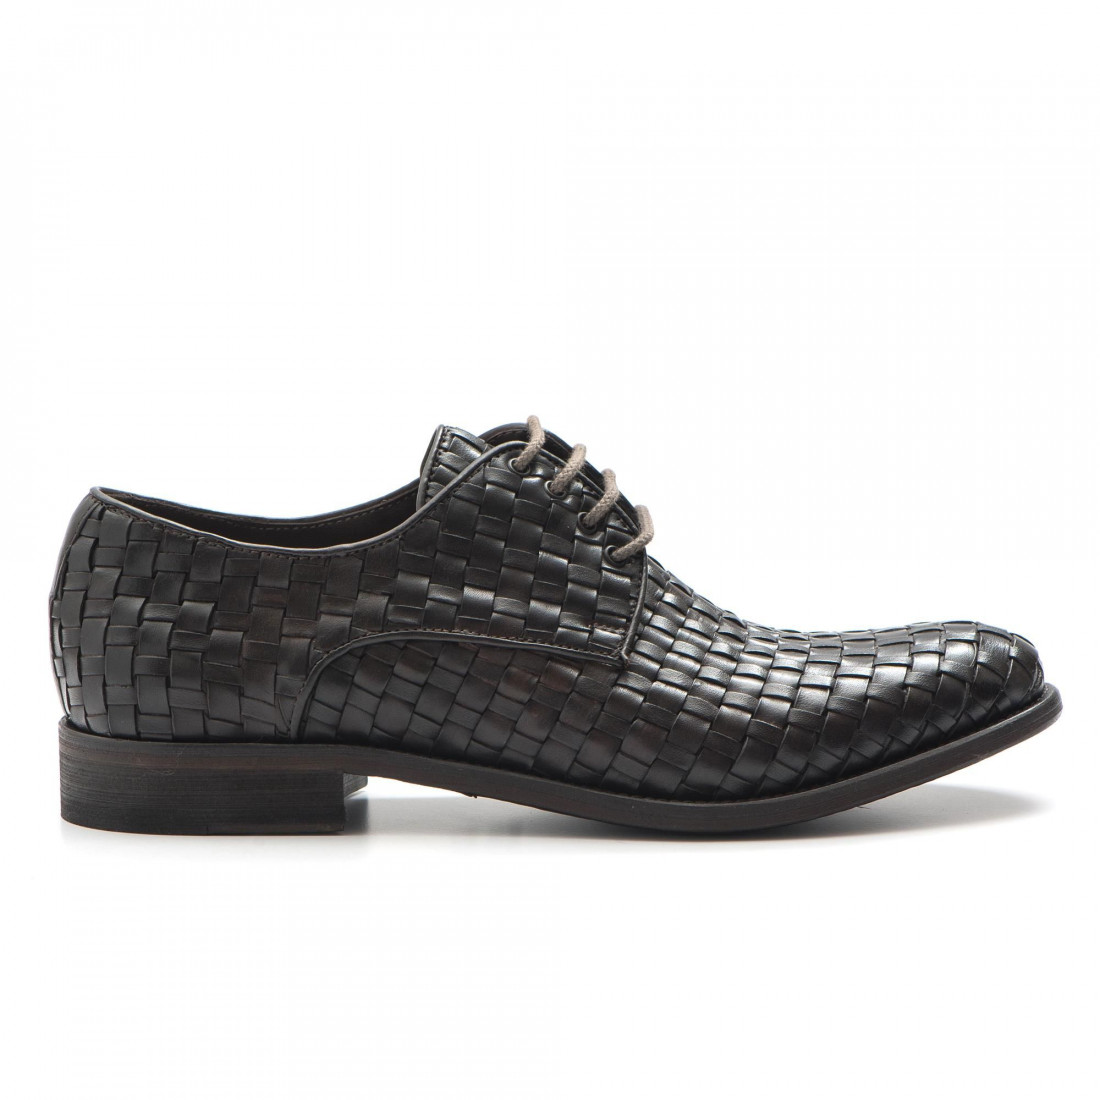 Brecos men's derby shoes in soft brown woven leather